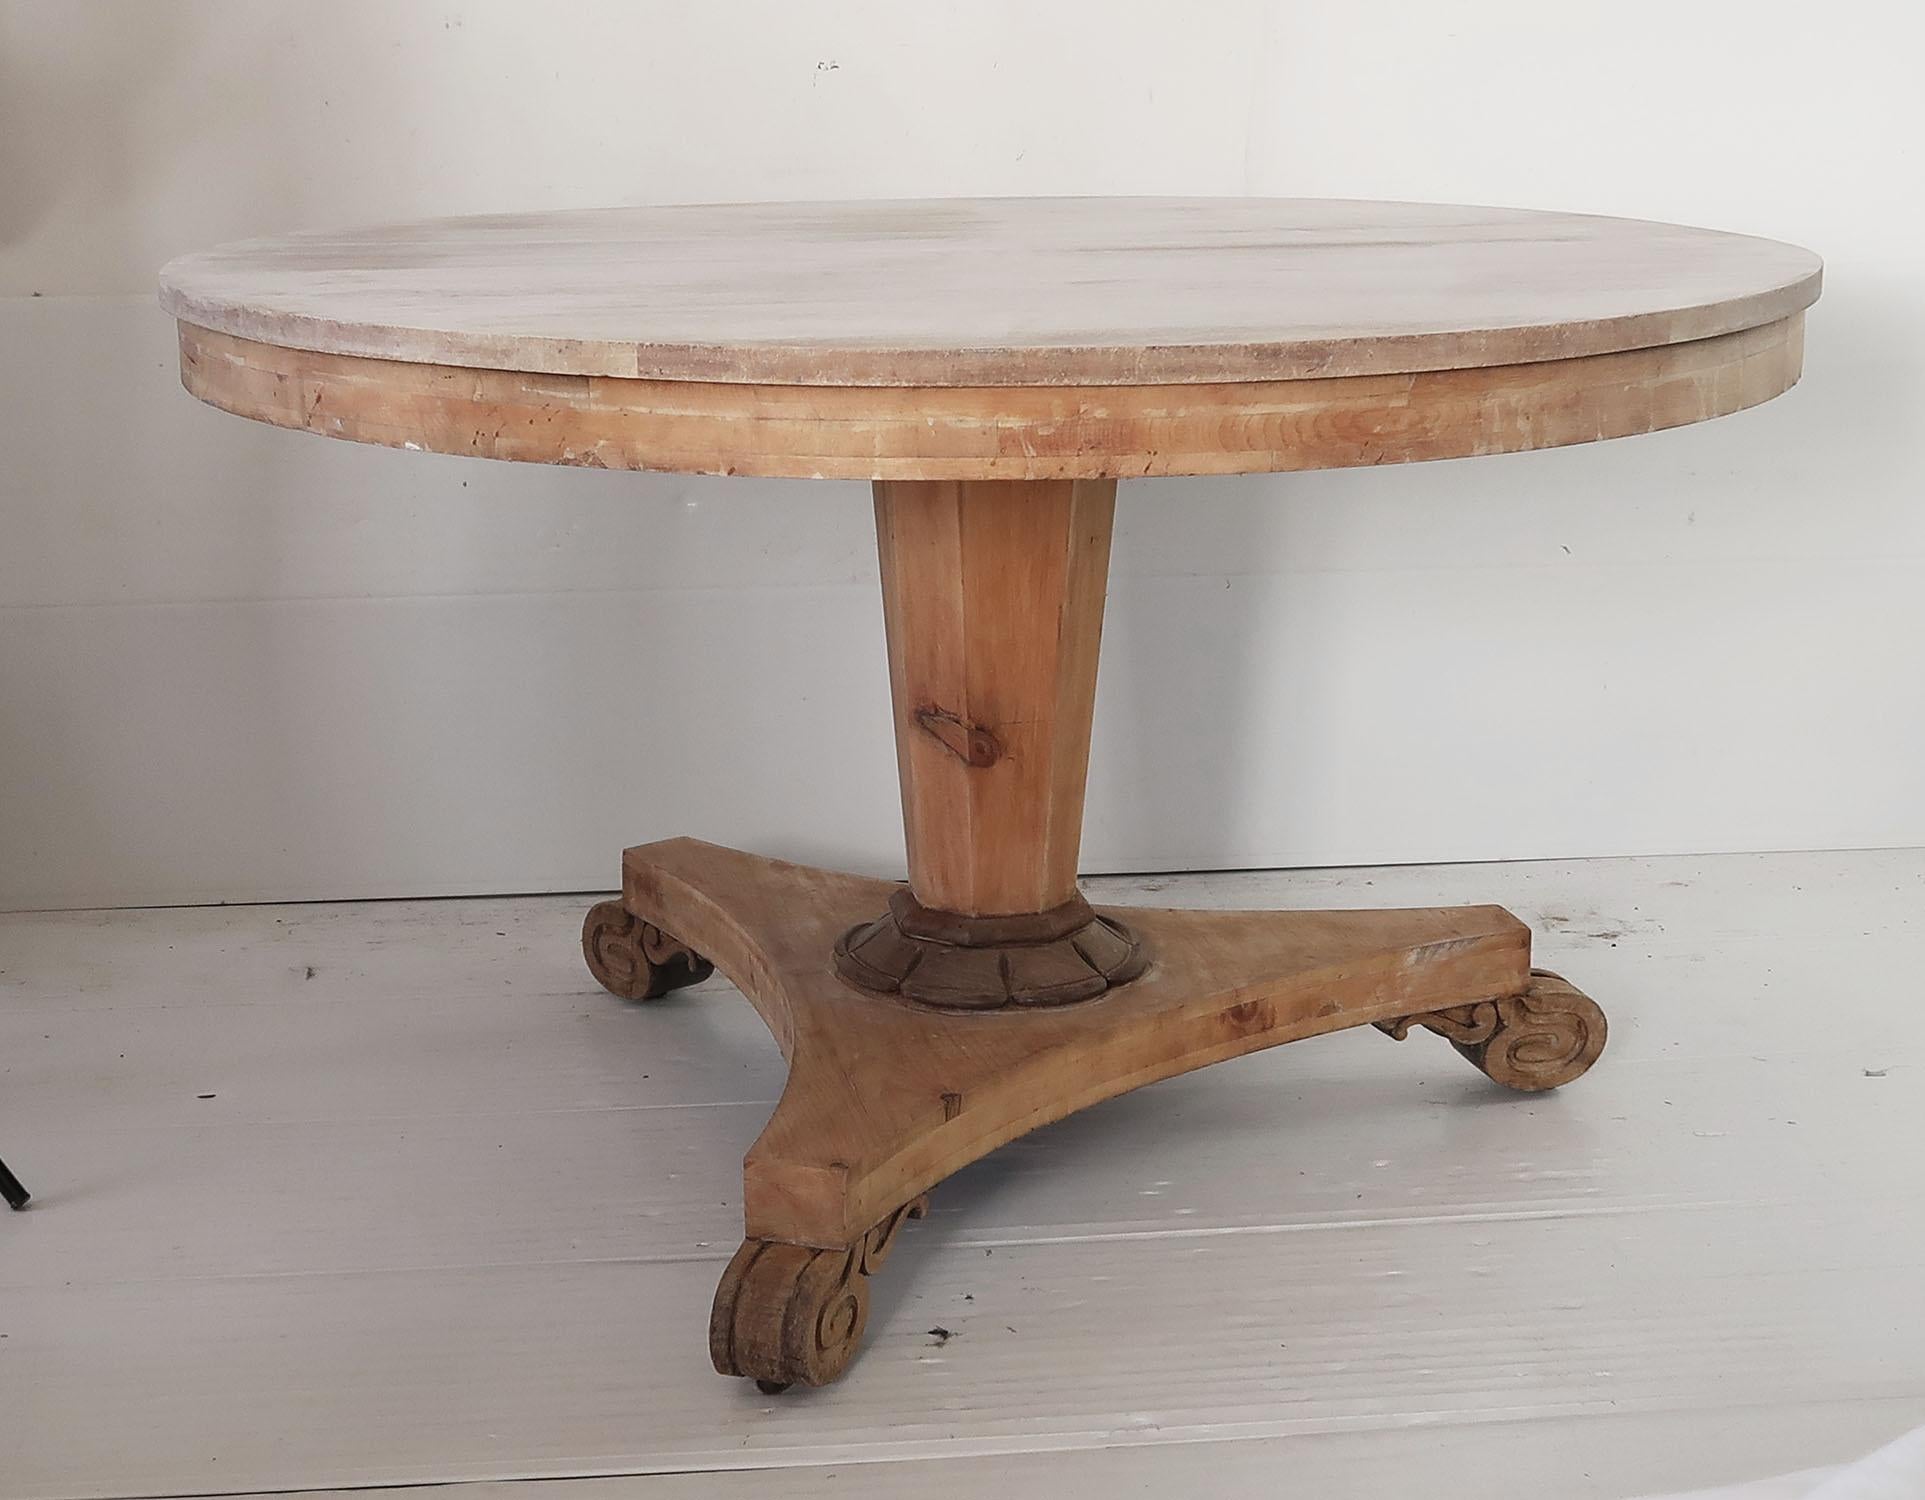 Fabulous large round Georgian table. Made from bleached Honduras mahogany and pine.

Beautifully figured top.

Great simple lines. I particularly like the simplicity of this table

I have chosen not to lacquer or wax the table.

Original